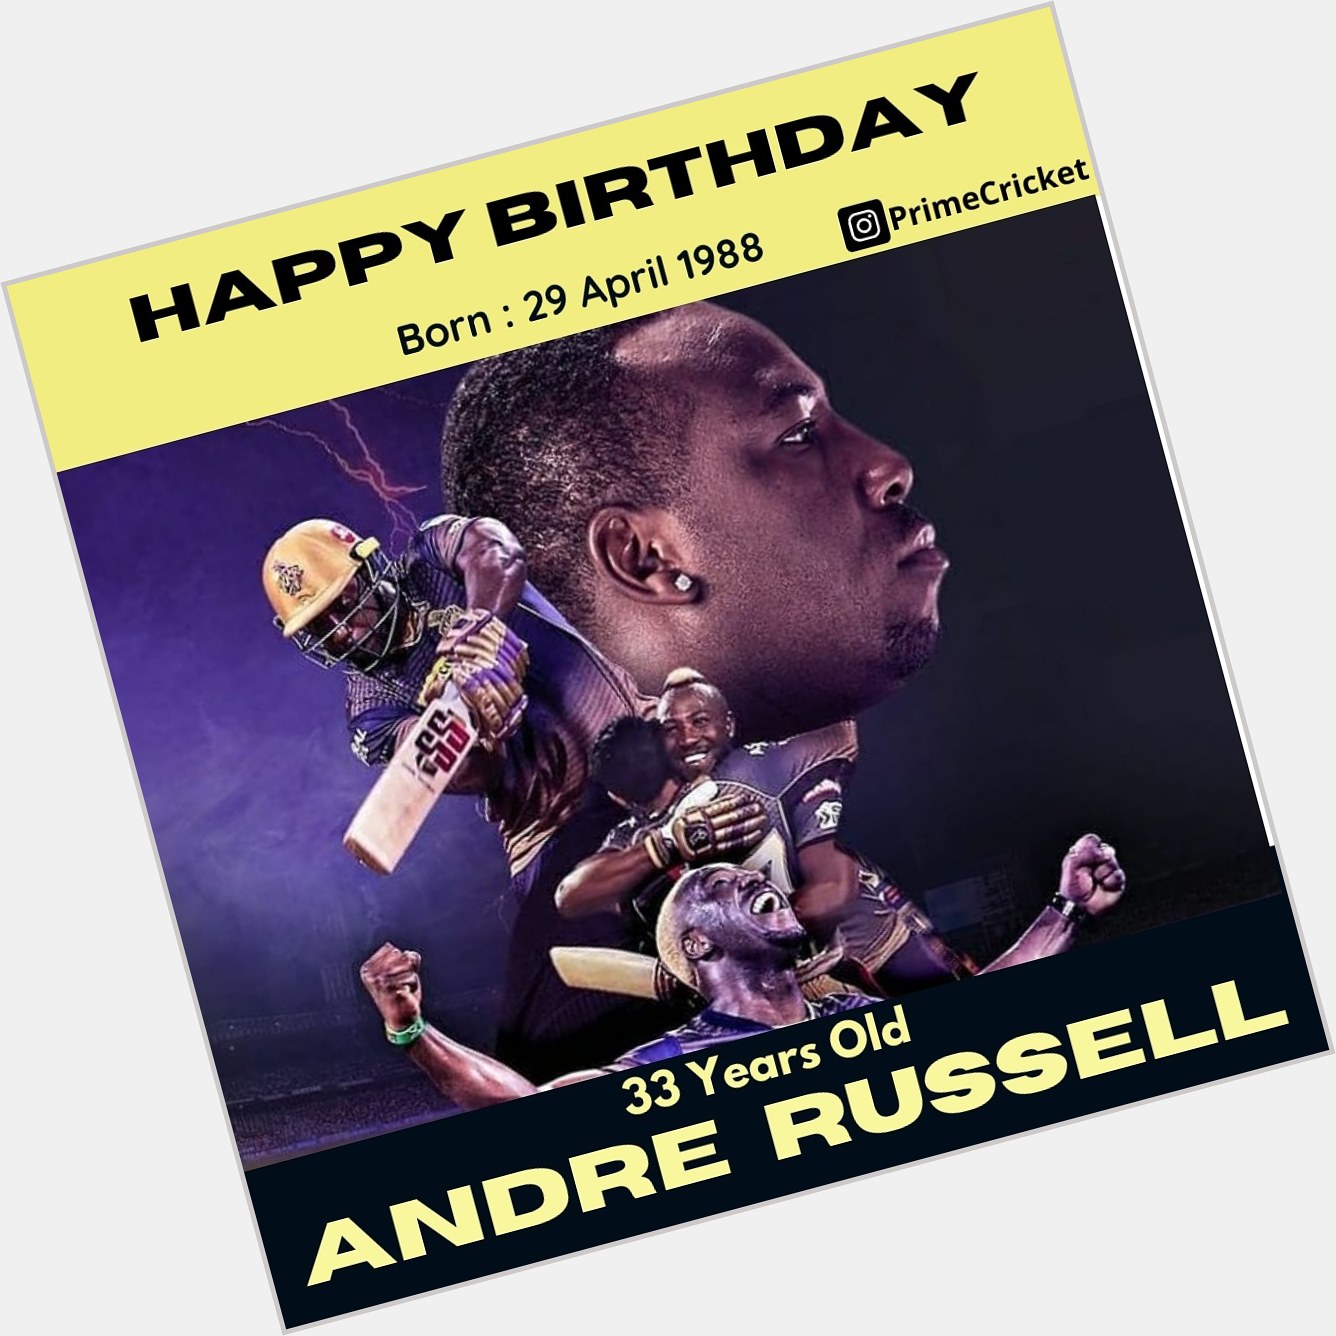 Happy Birthday Andre Russell    